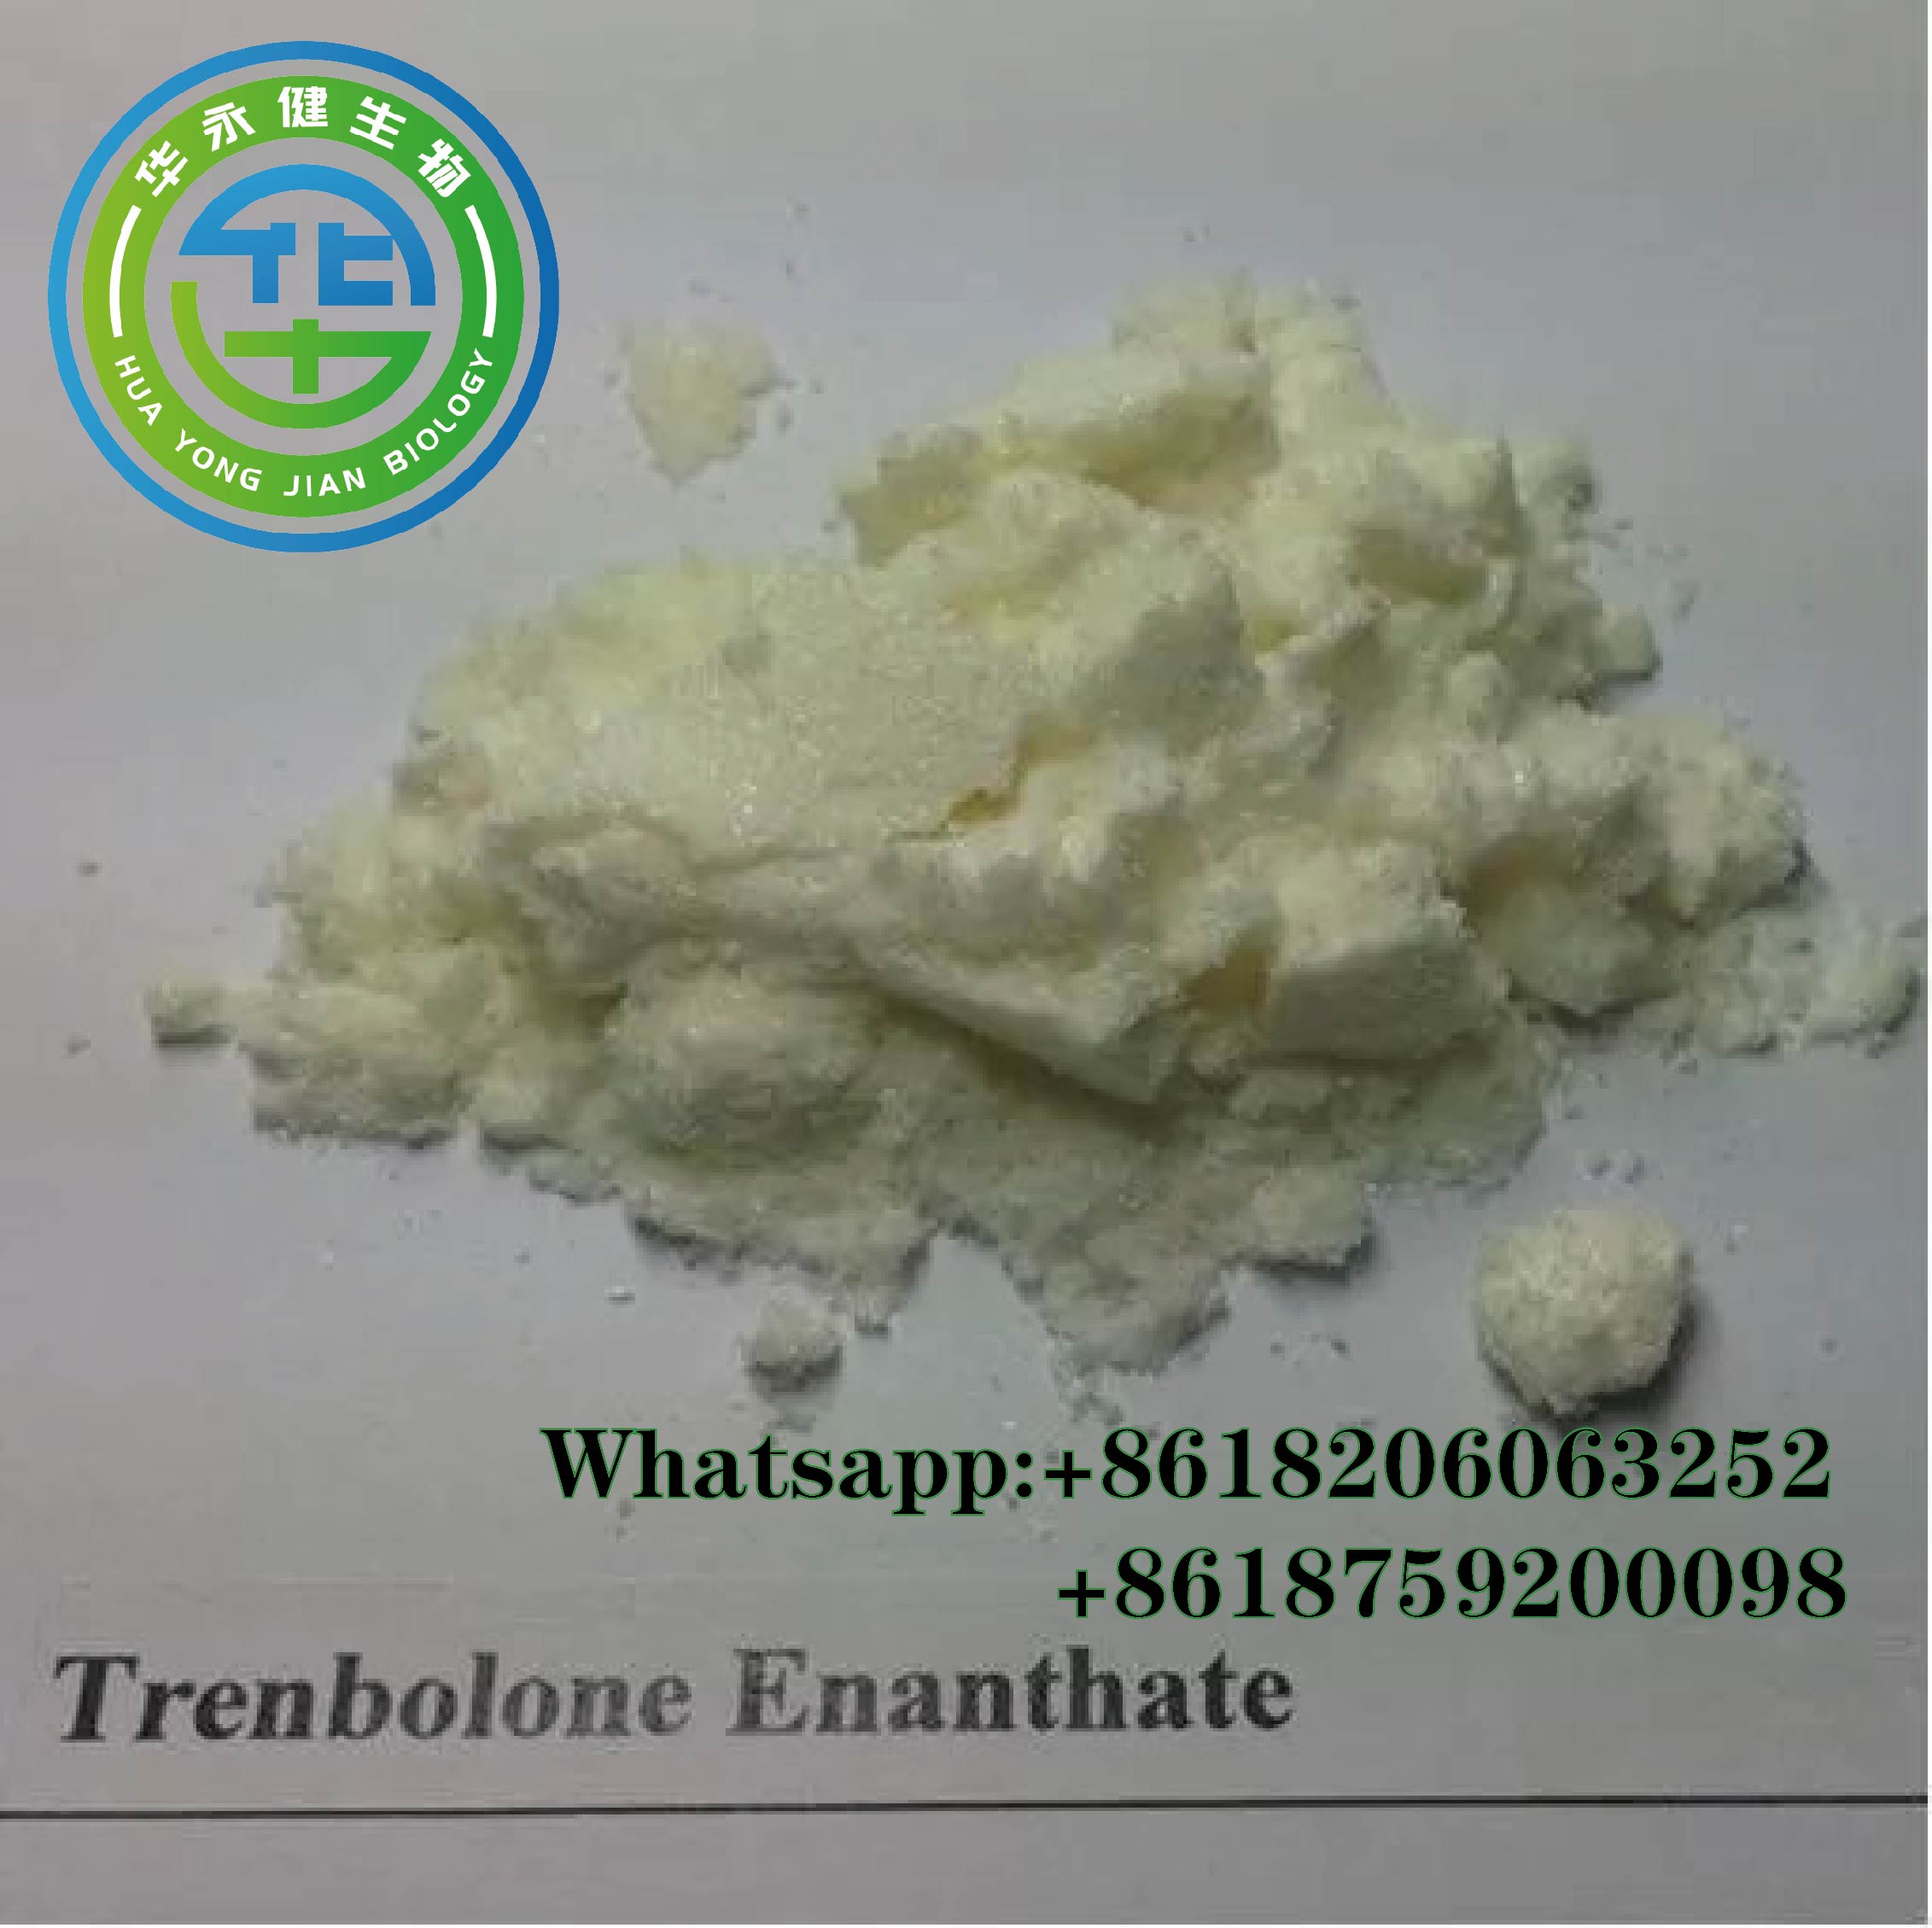 Trenbolone Enanthate /Tren Enan Yellow Synthetic Steroids powder for Muscle Building 